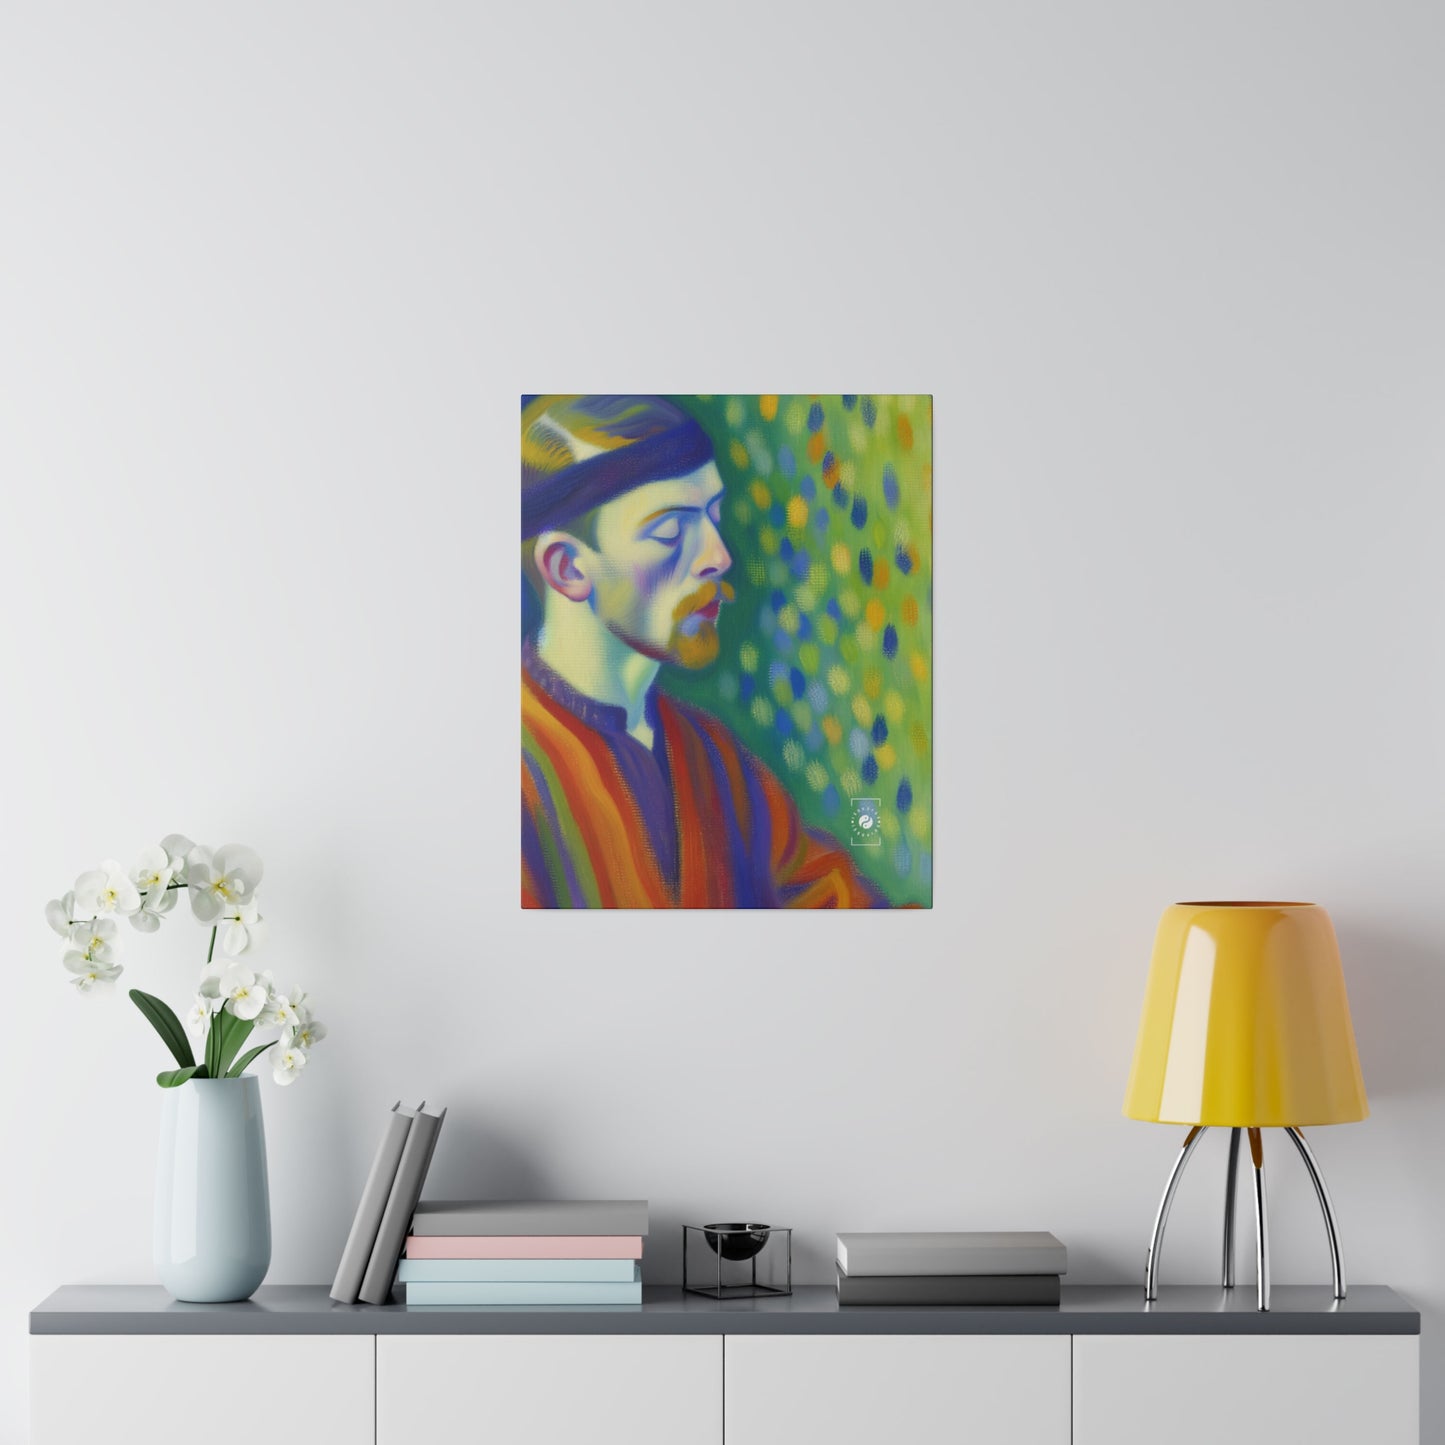 "Serene Resilience: A Frida's Solitude in hues" - Art Print Canvas